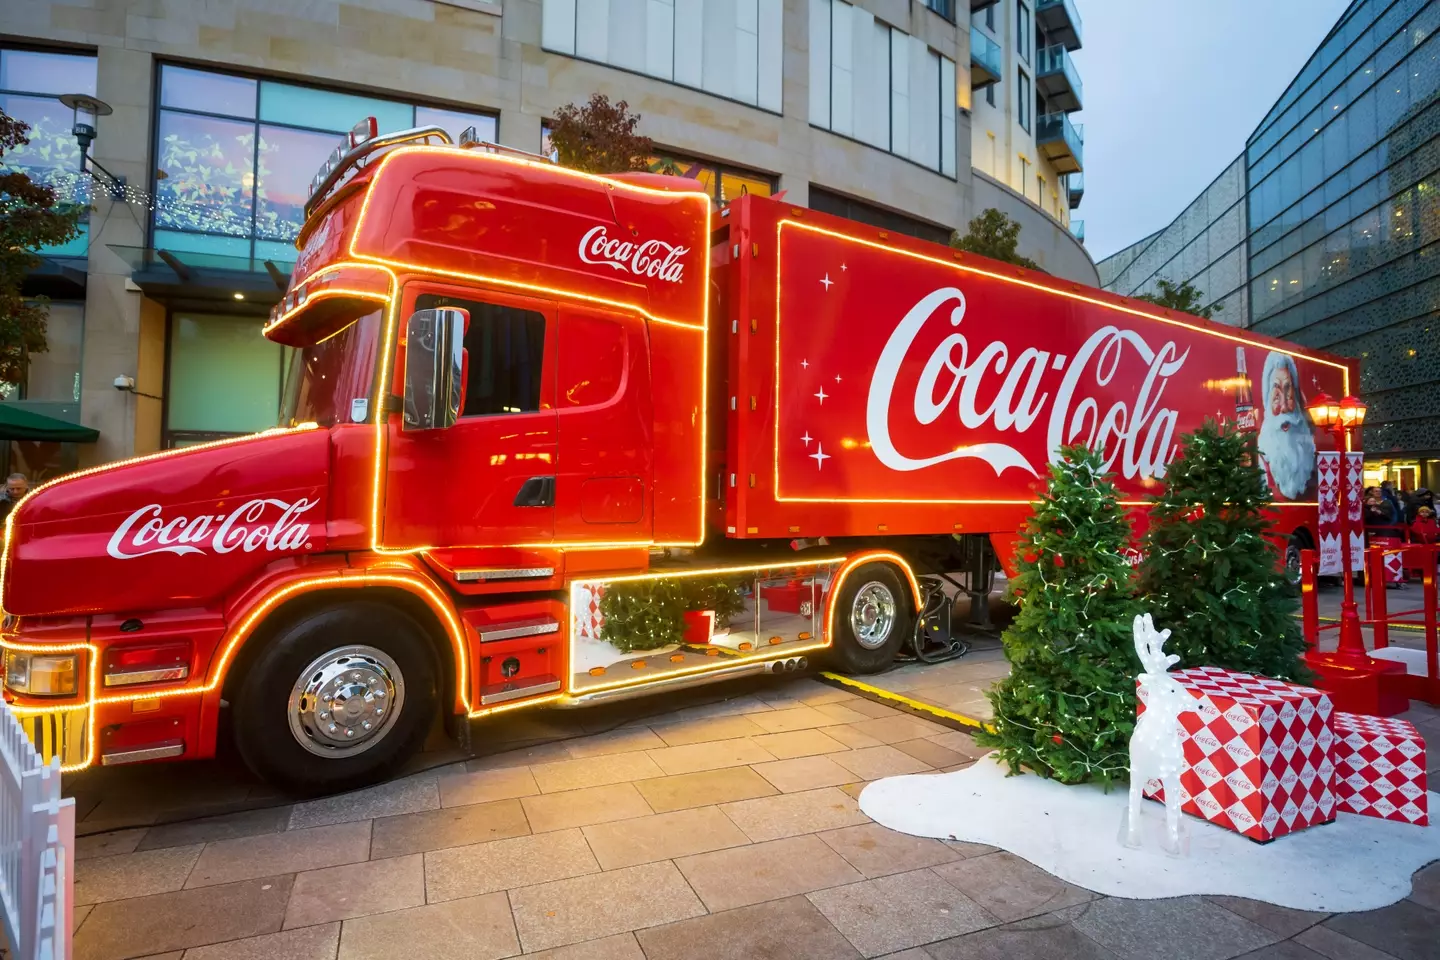 The Coca-Cola truck will be back on the road soon. Credit Matthew Horwood/Getty